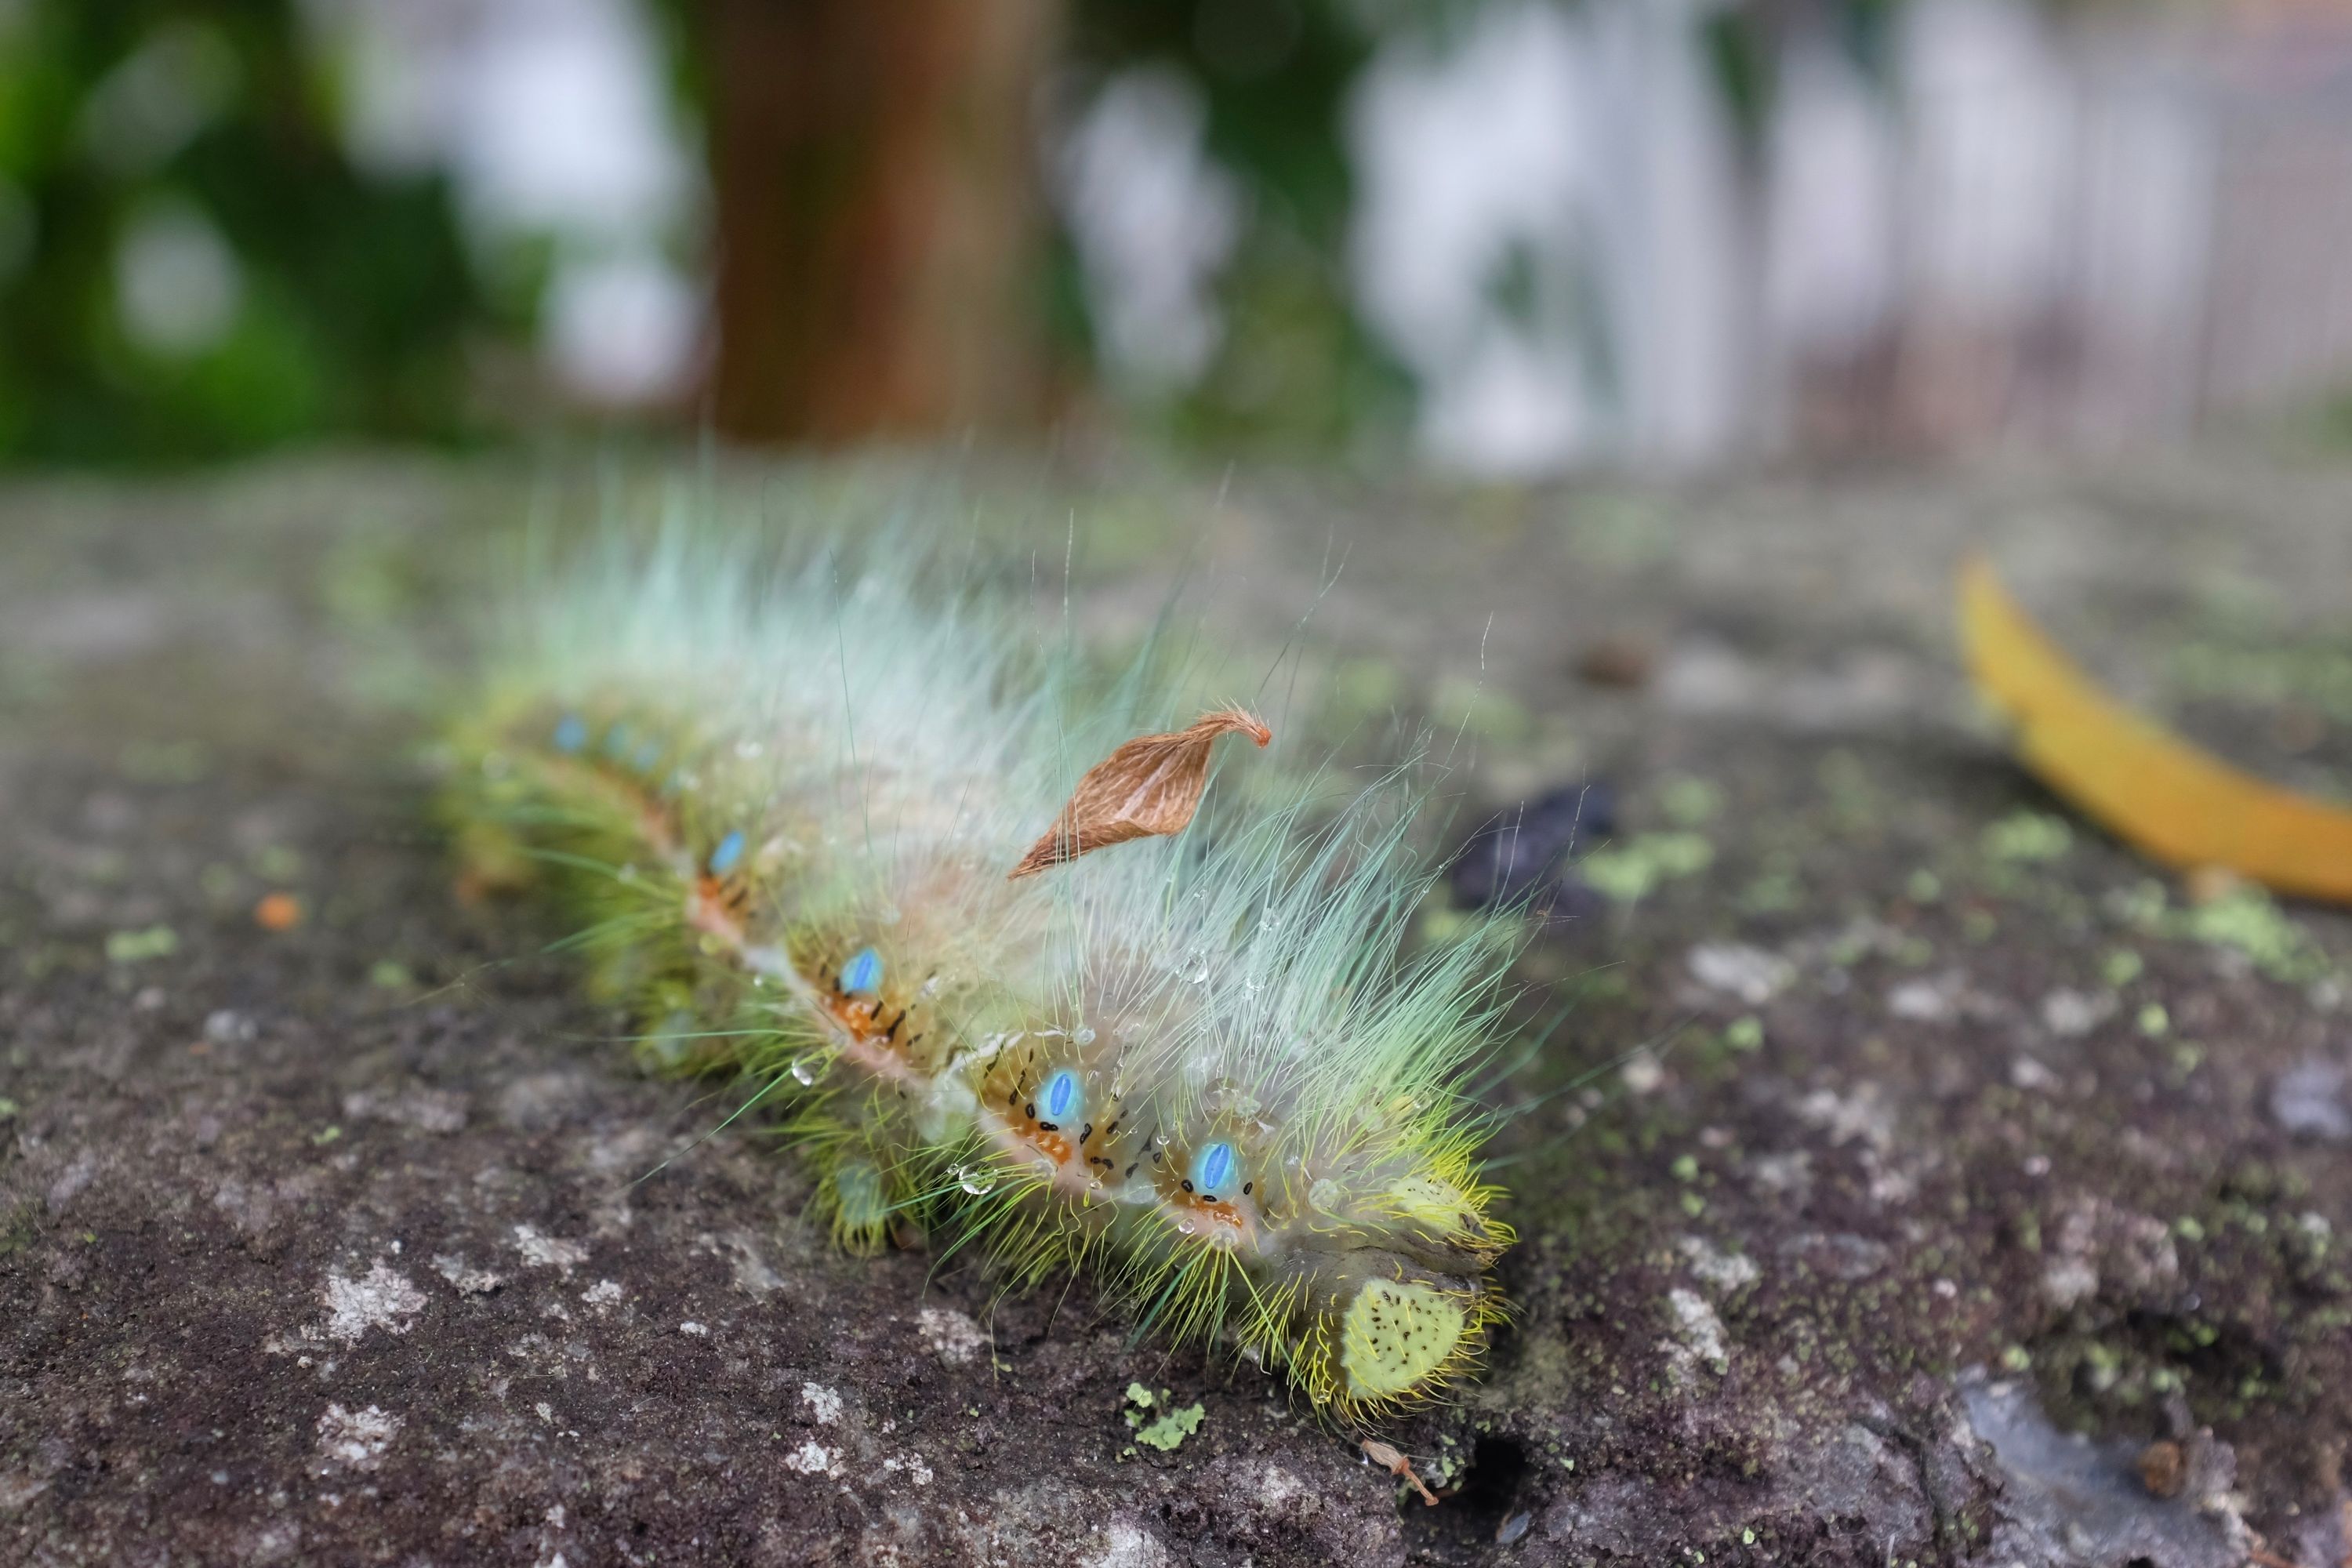 An extravagant-looking green and blue caterpillar.